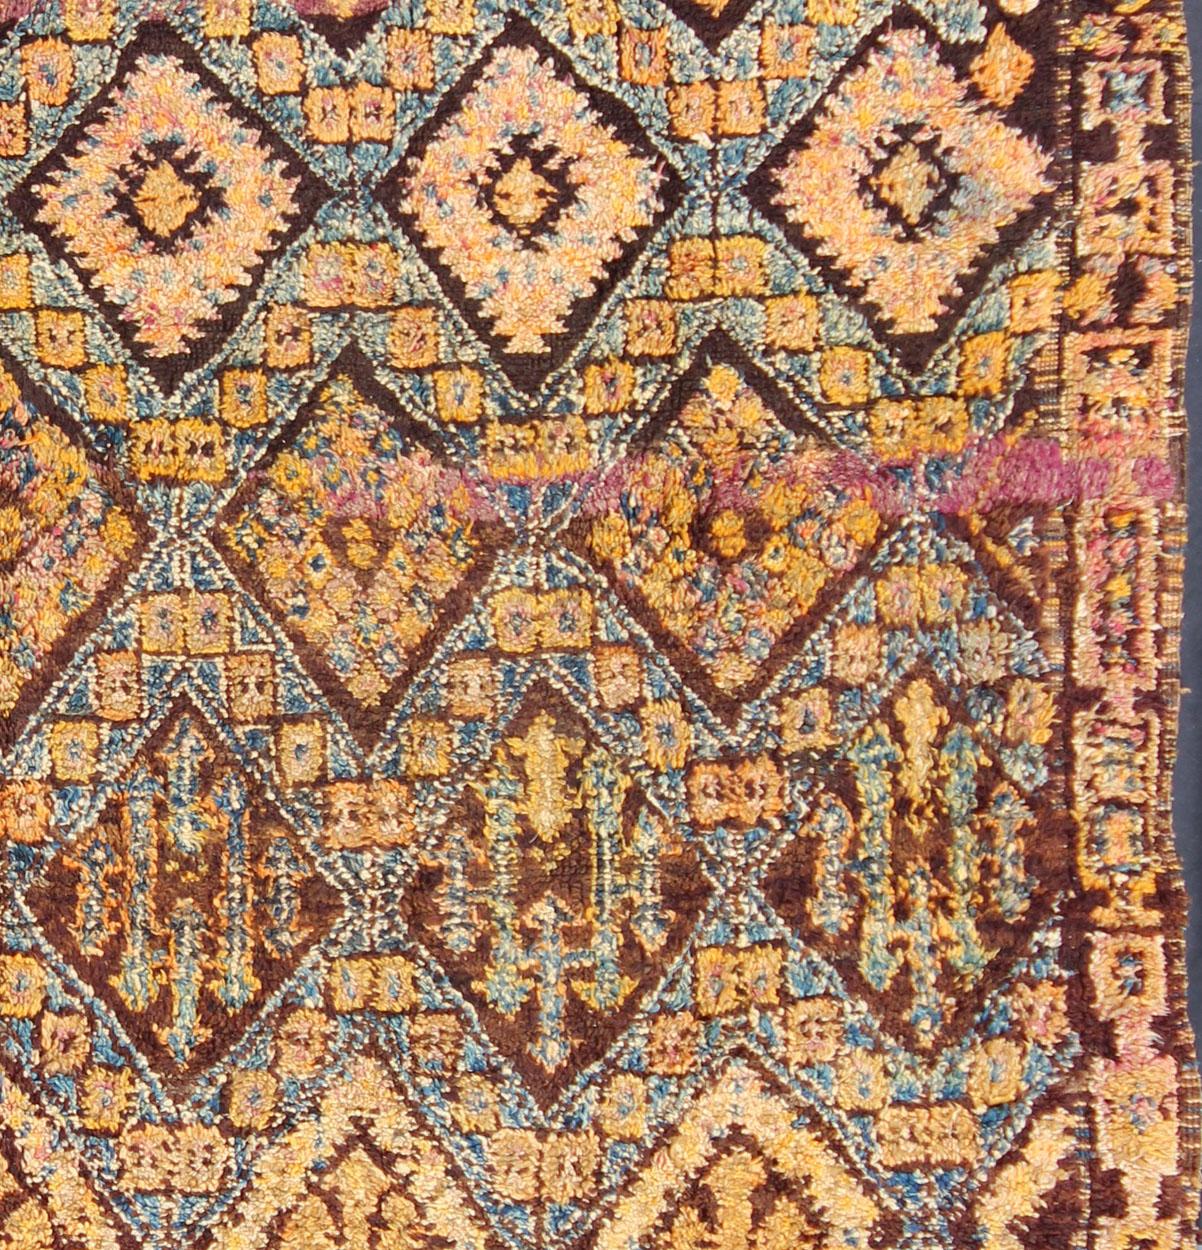 Measures: 7'9'' x 8'4''.

This piece is a thick and lush vintage tribal Moroccan carpet which originated from the northern Middle Atlas mountains. The weavers of the piece, people of the Berber tribe, are known to create very special deep pile